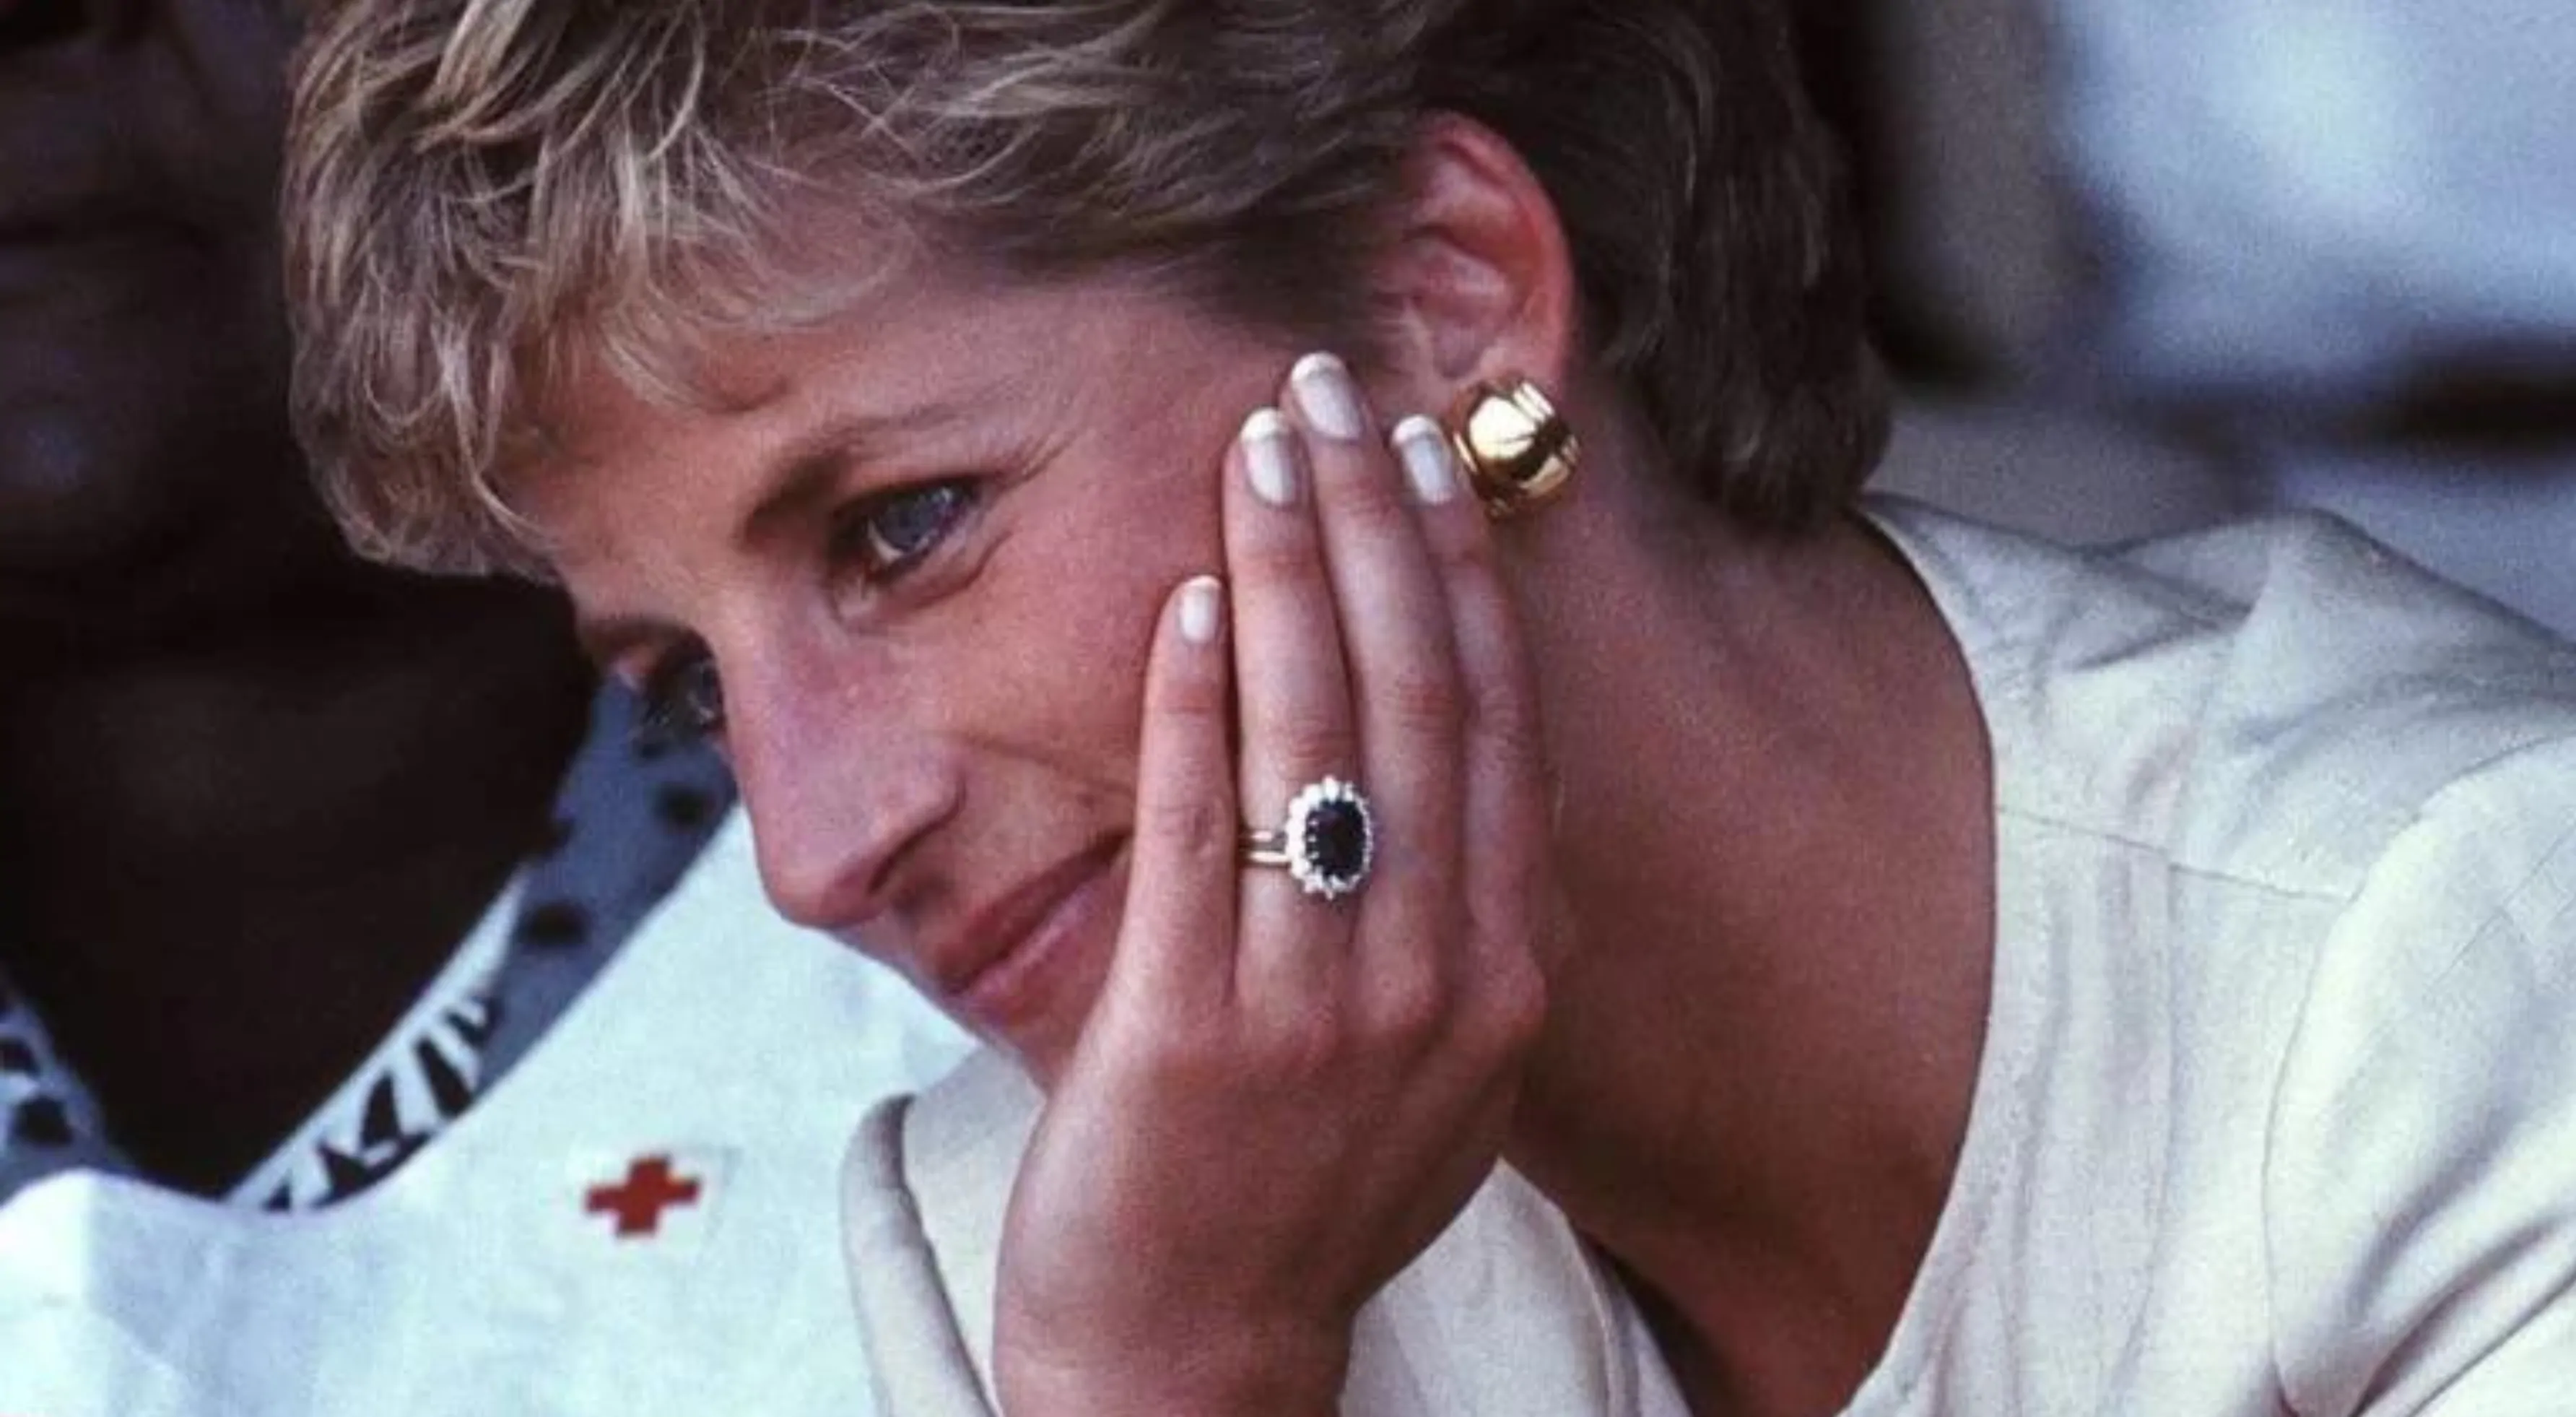 The Story of an Iconic Piece of Jewellery: Princess Diana’s Engagement Ring